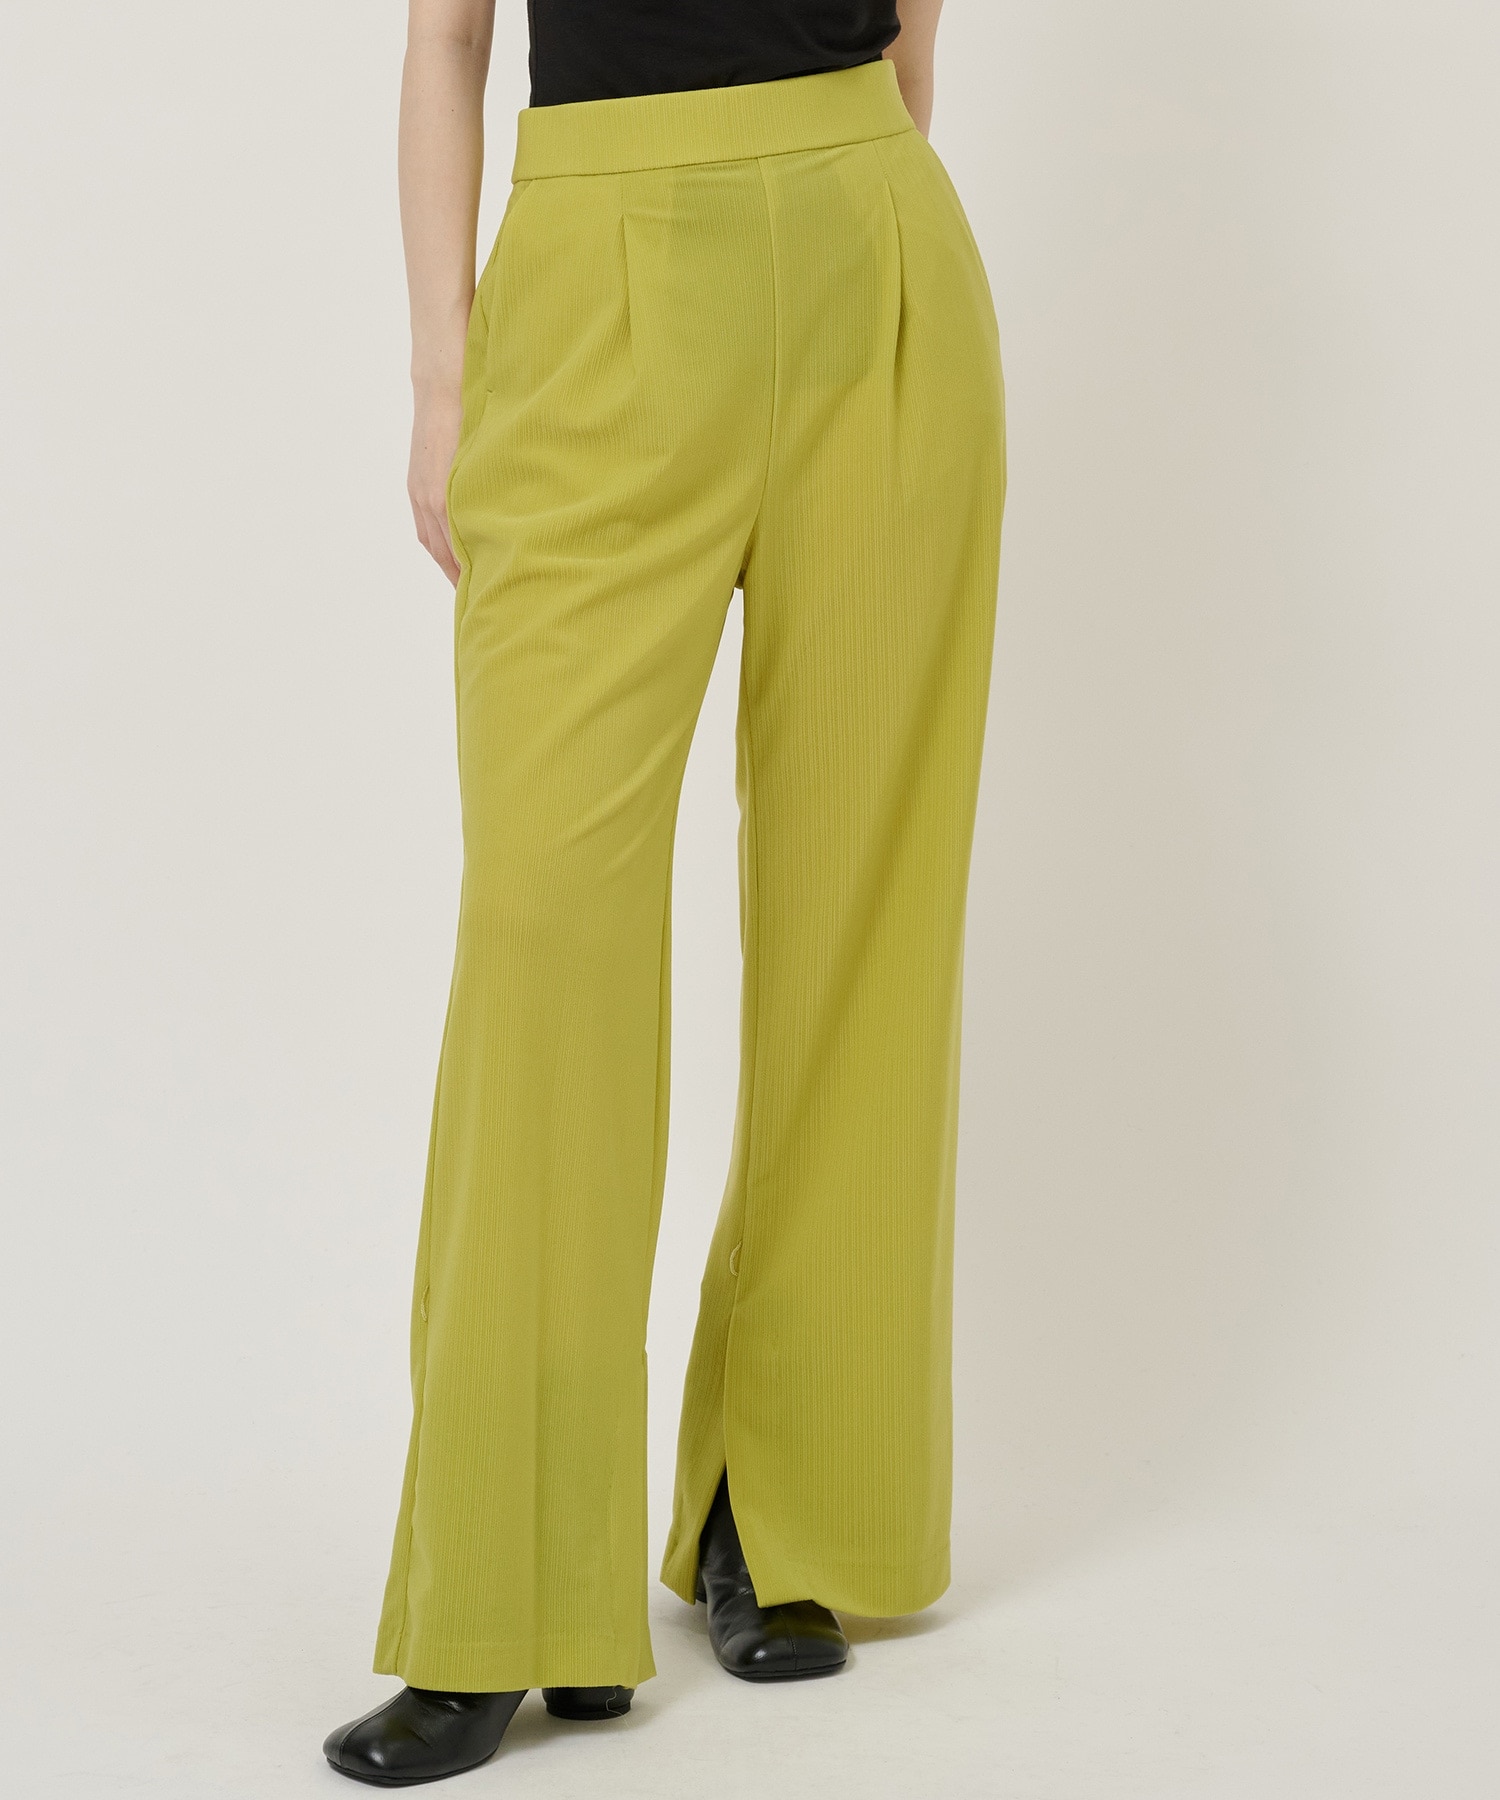 Relax Ancle String Pants